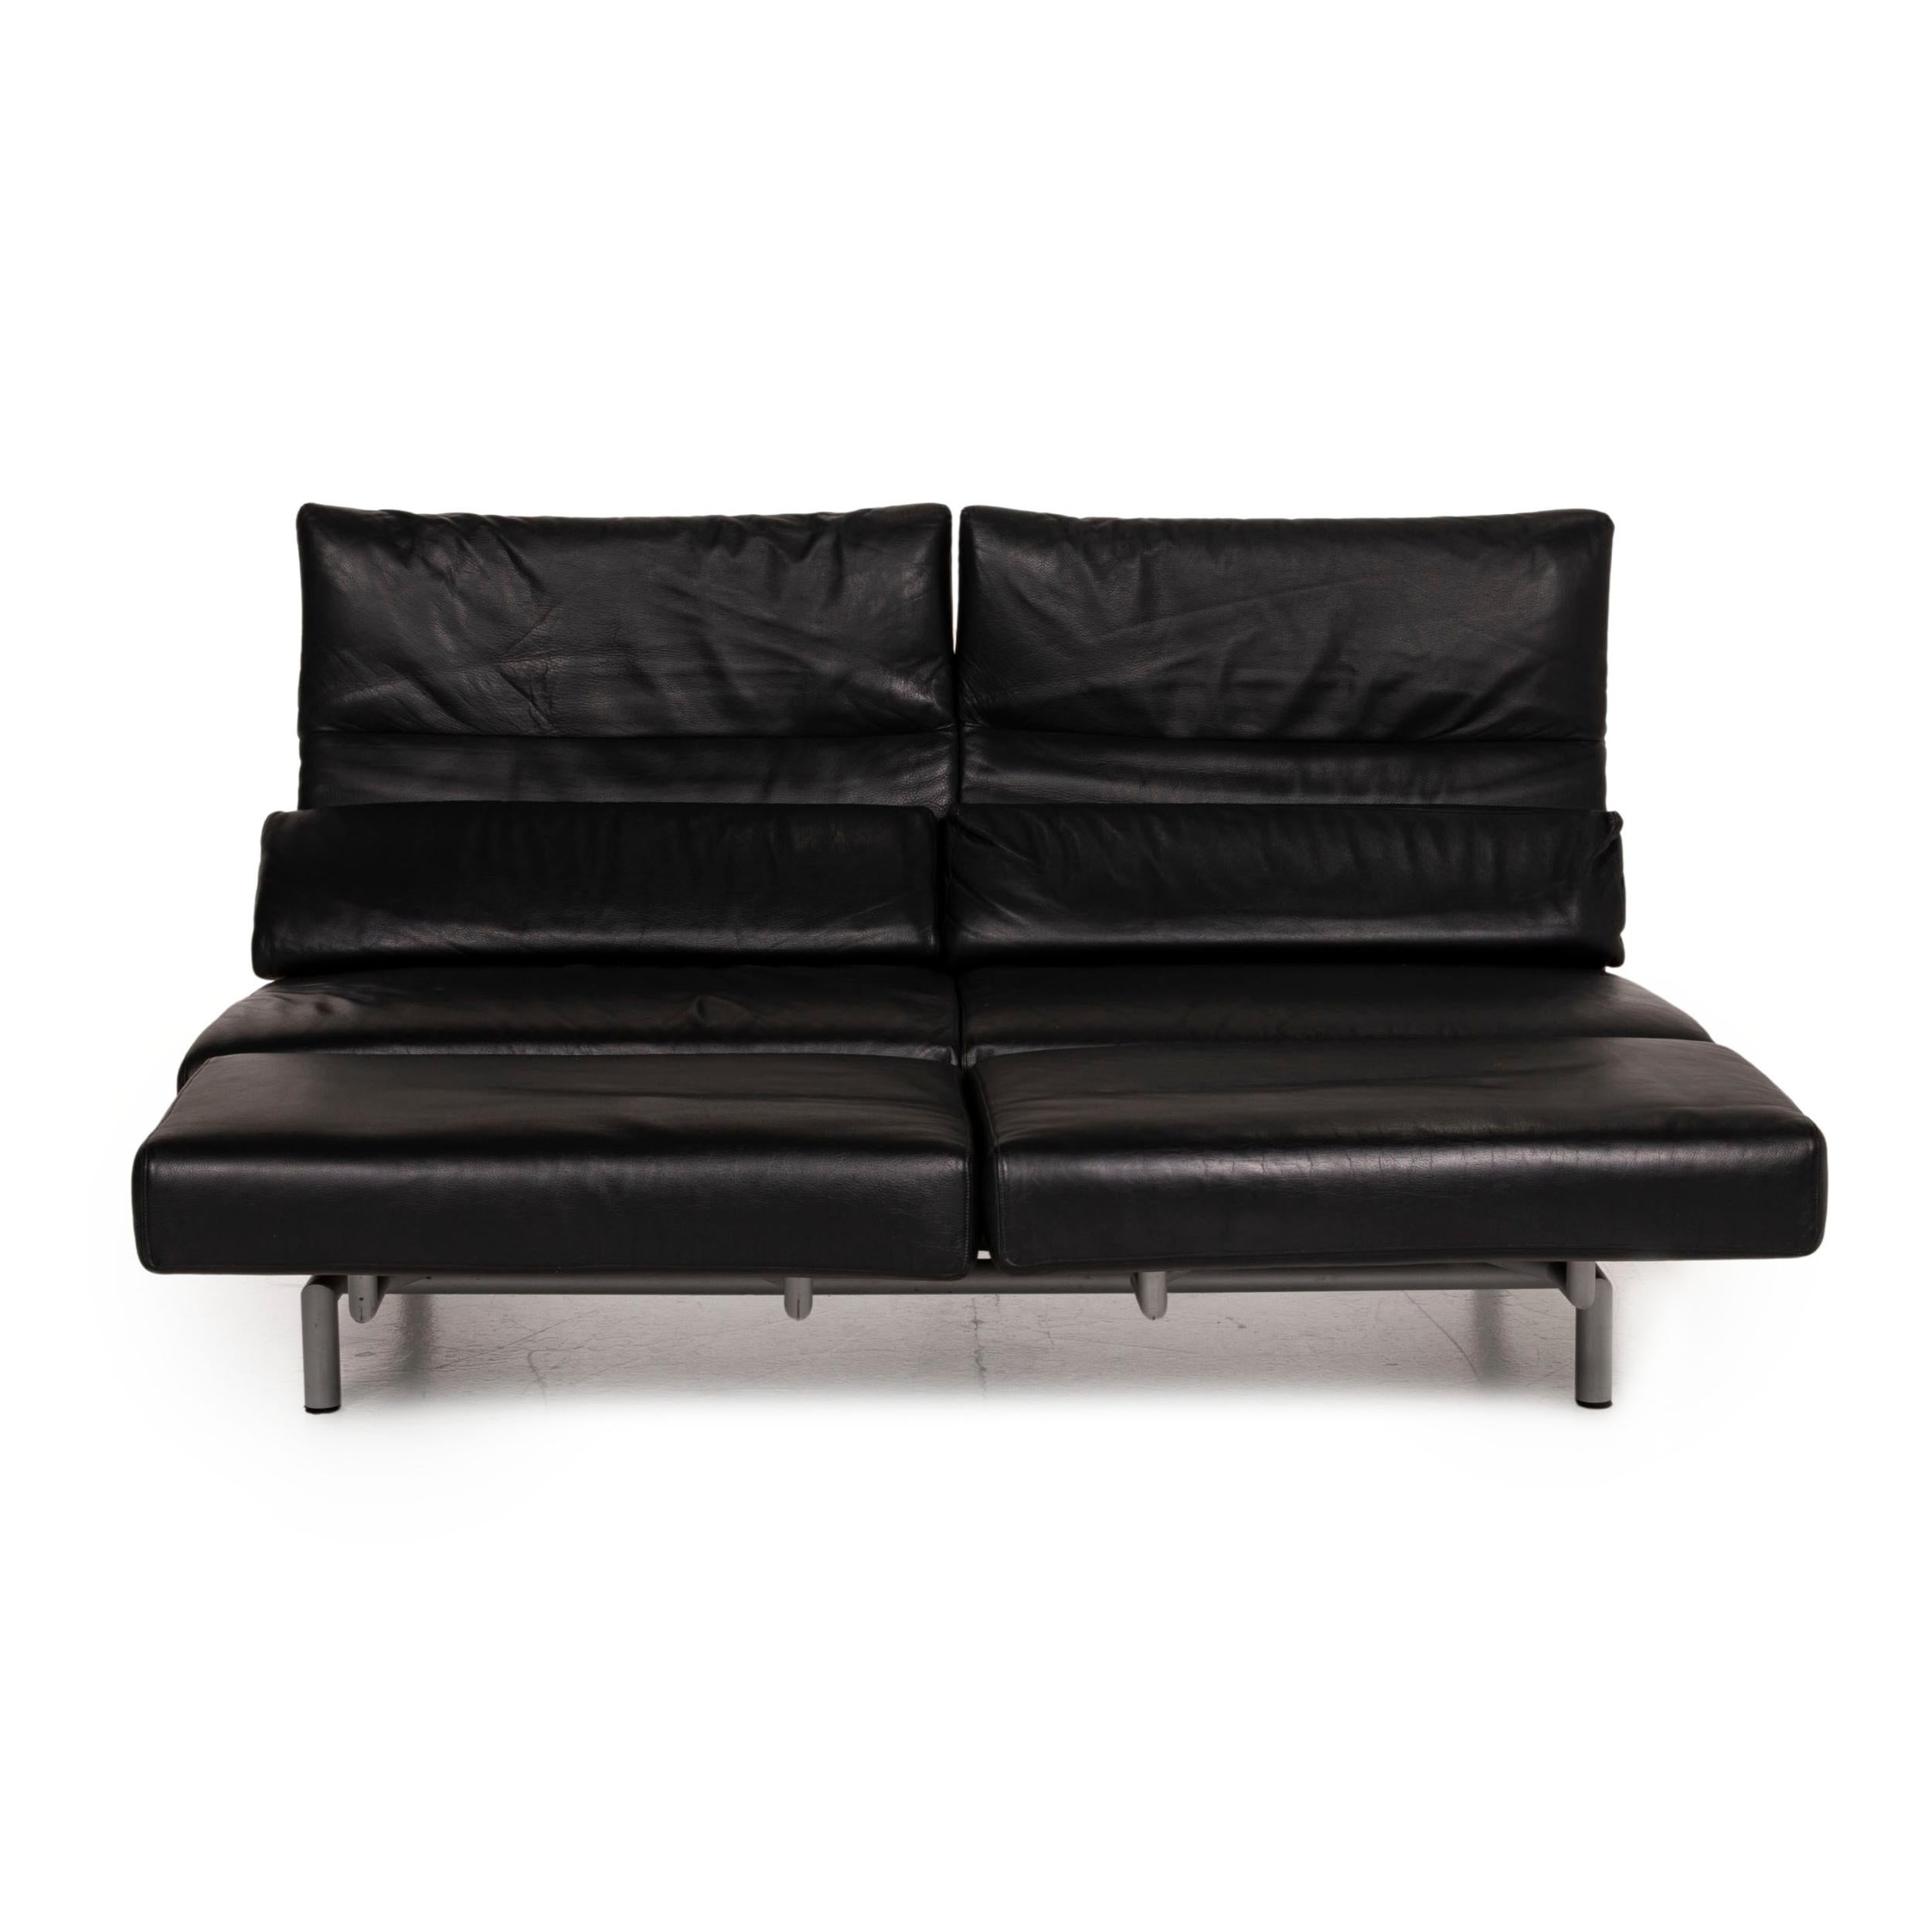 Modern Strässle Matteo Leather Sofa Black Two-Seater Function Relax Function Couch